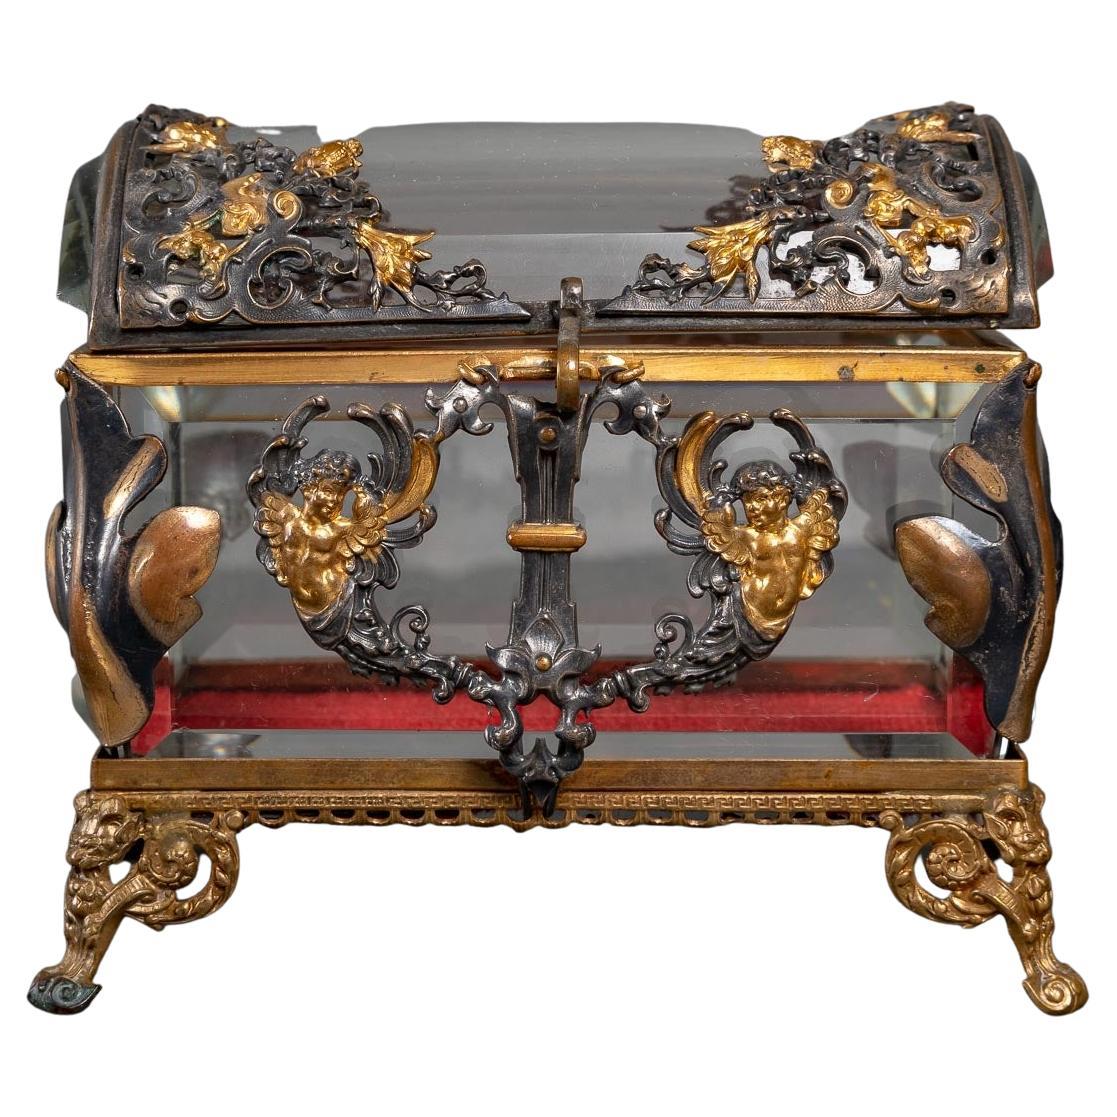 Beautiful Crystal Jewelry Box, Mounted in Silver and Gilded Bronze